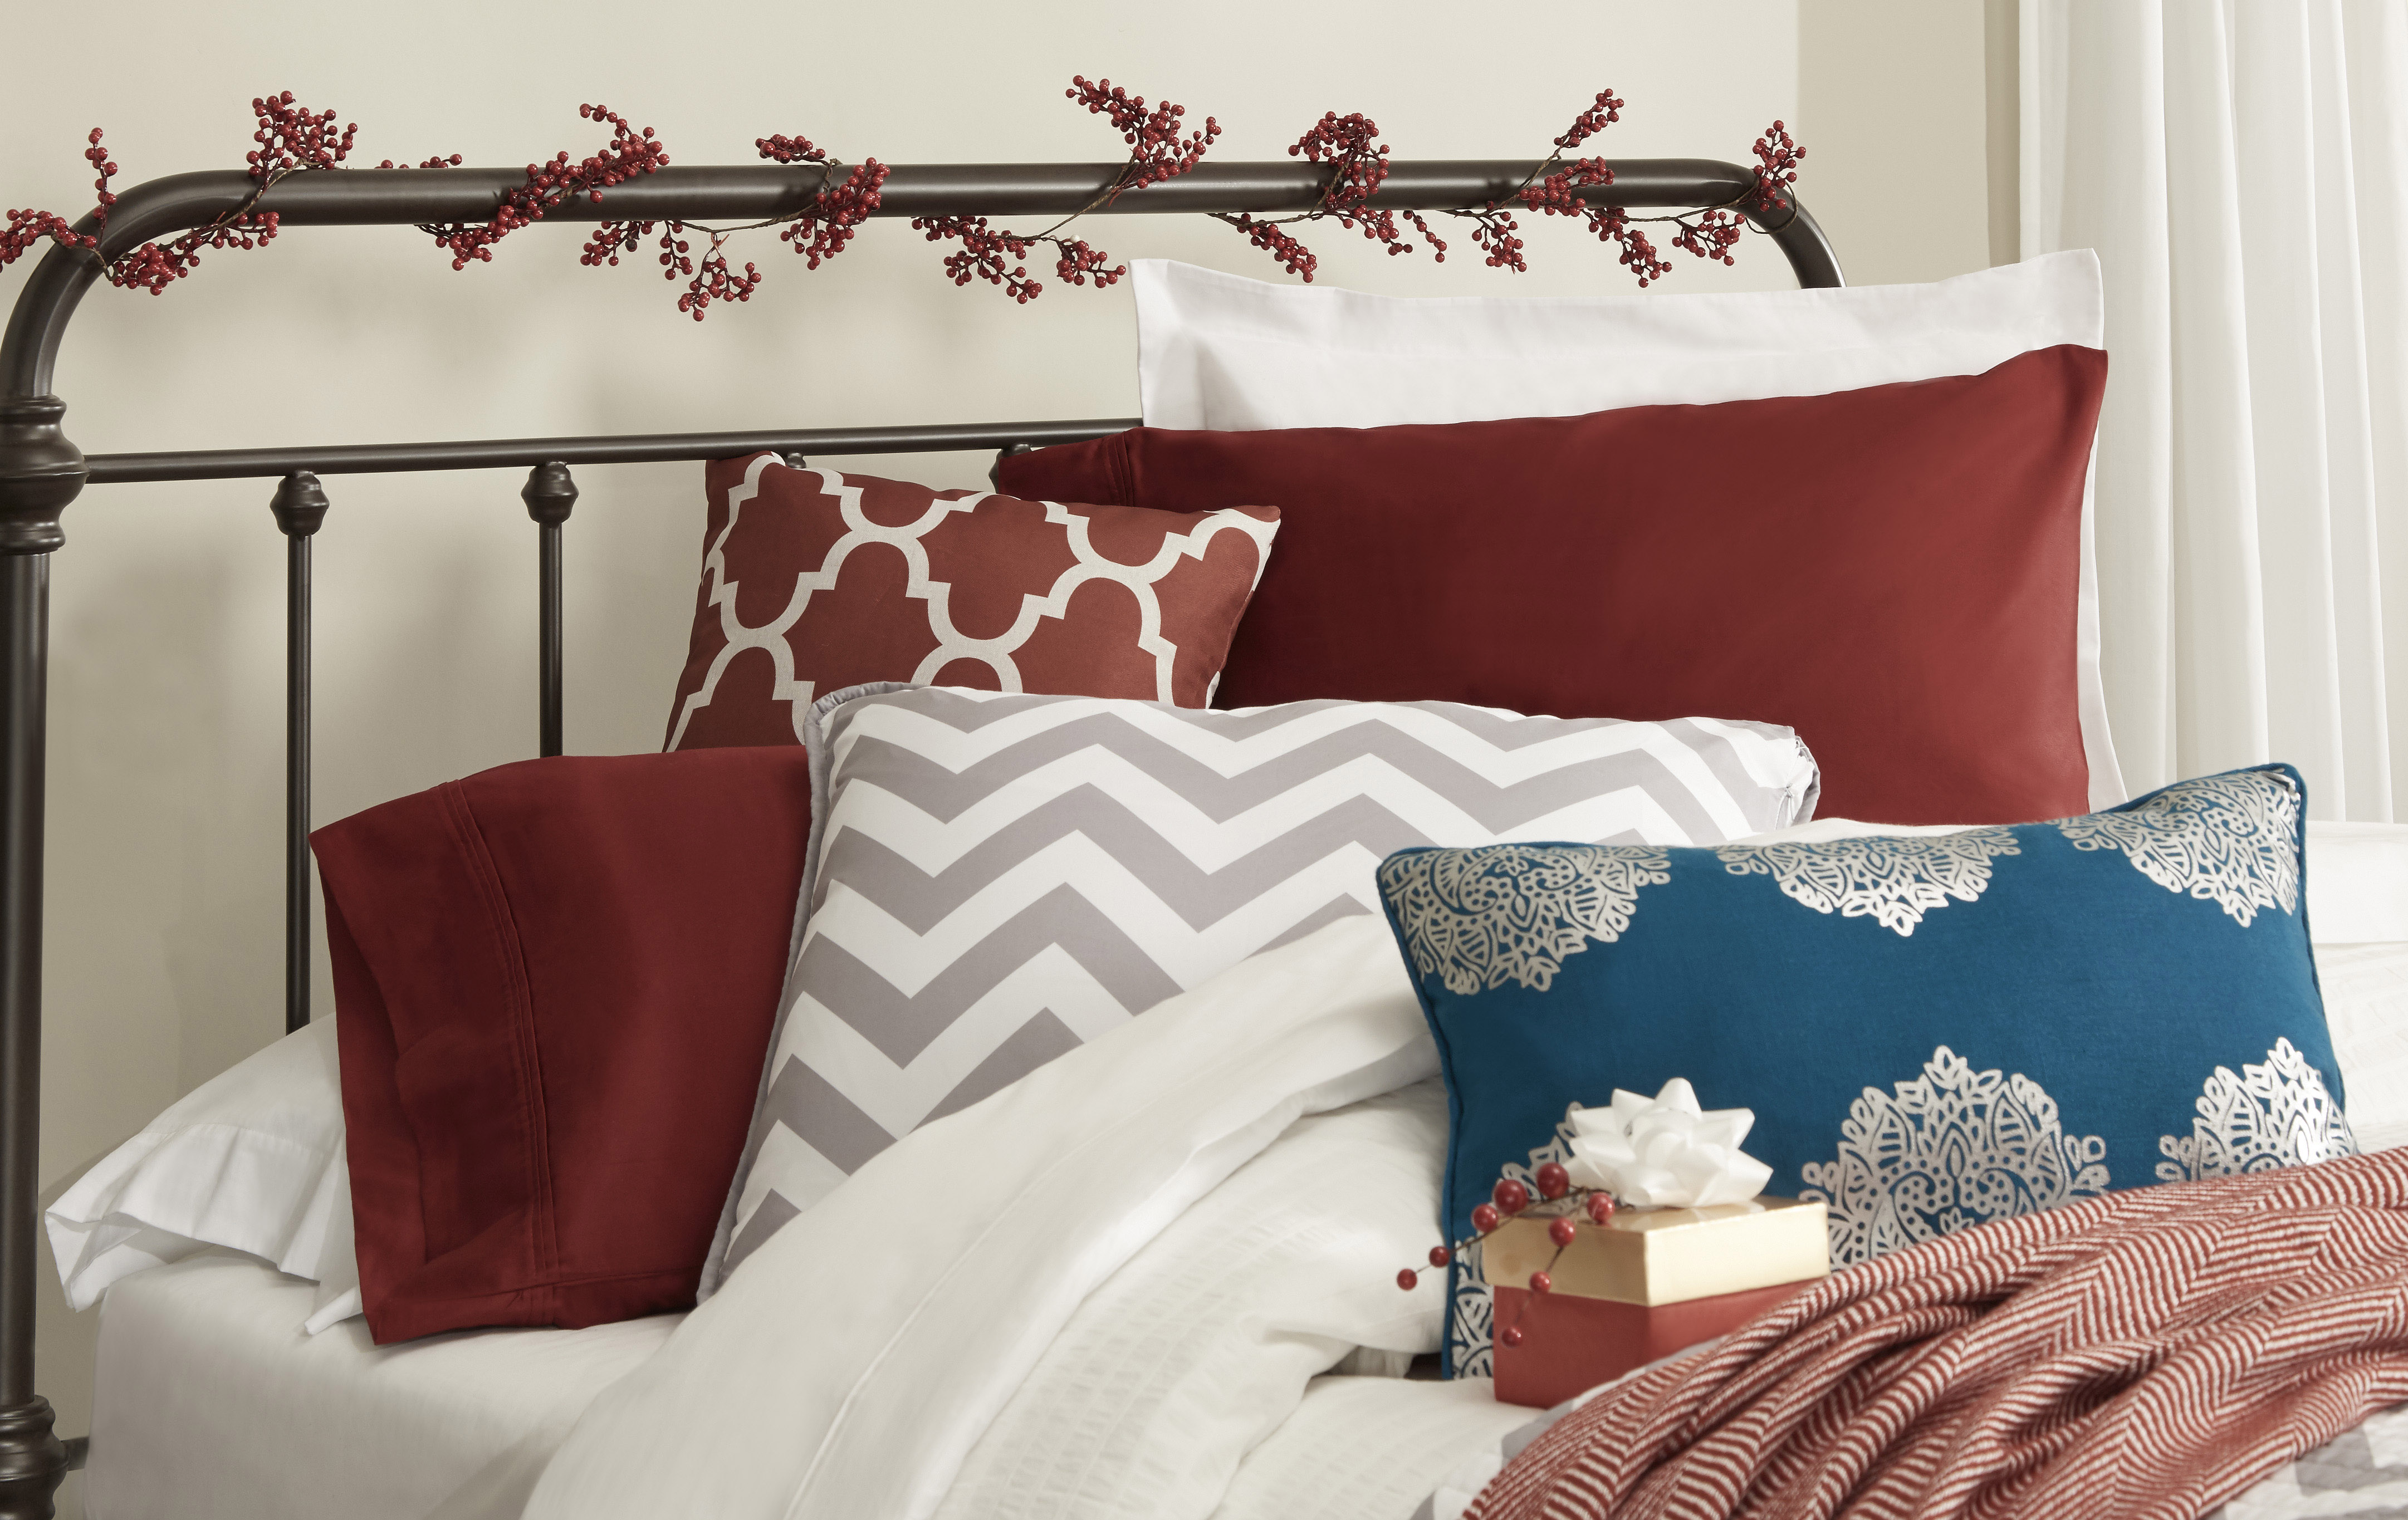 iNSPIRE Q decorative holiday headboard with faux berry vine tied around posts